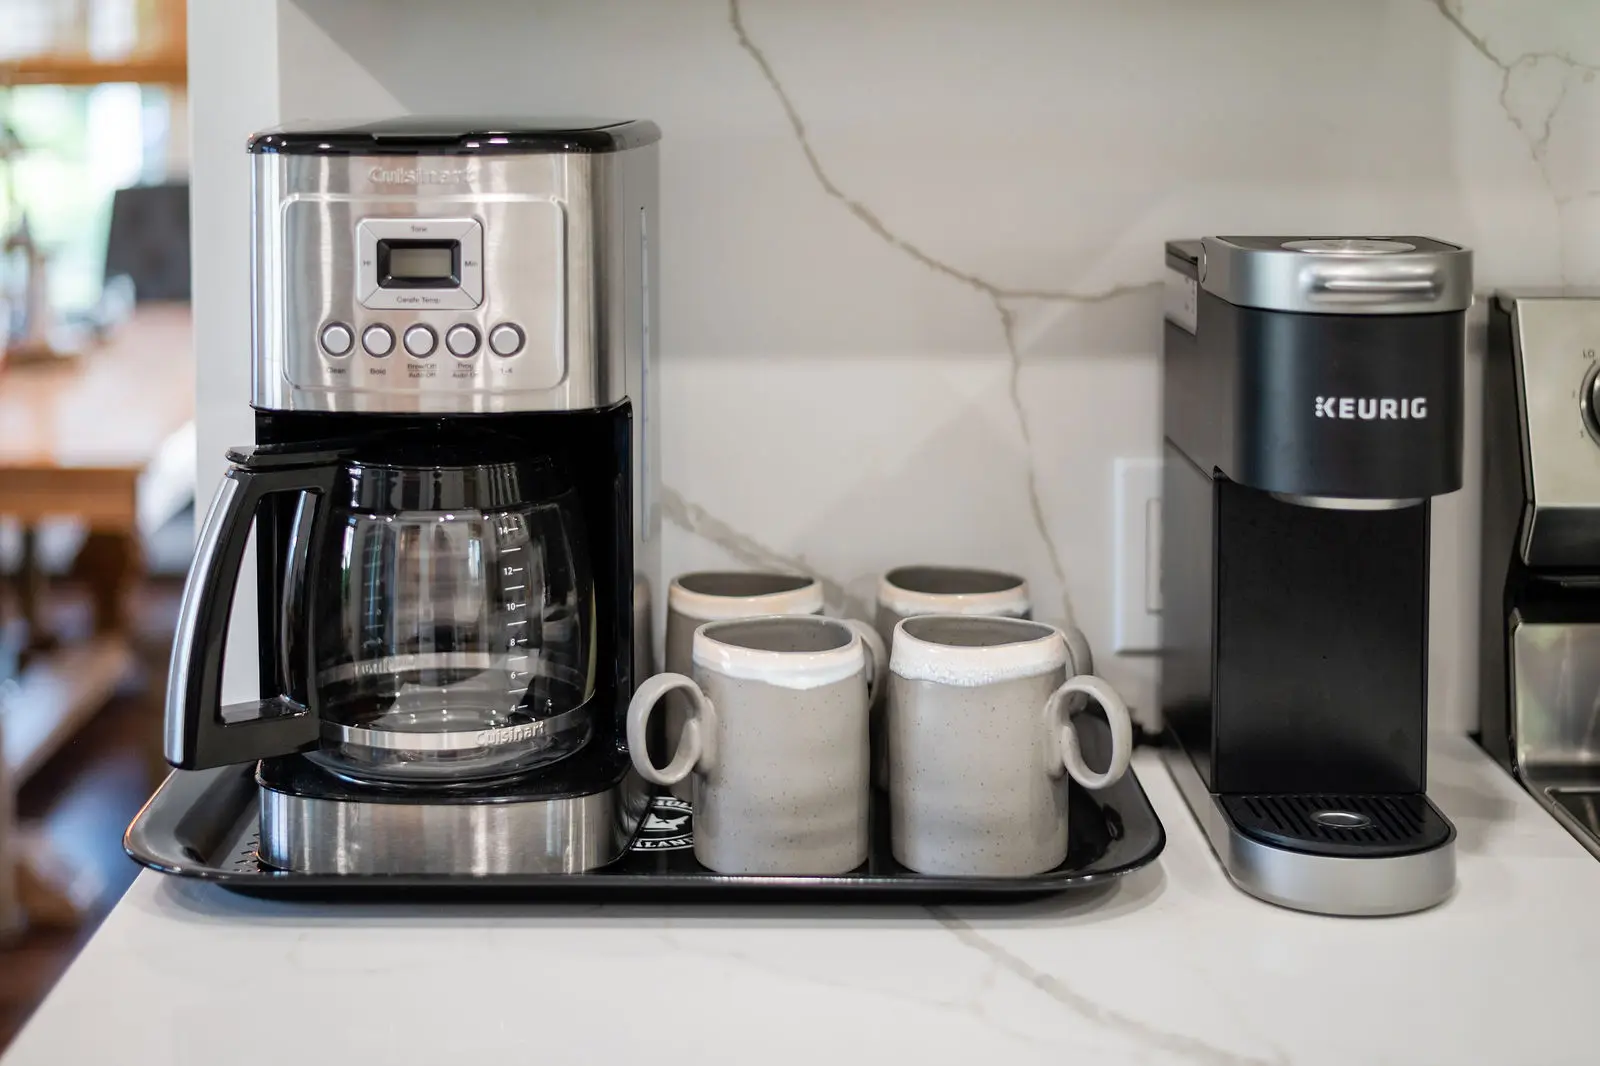 A coffee maker and two cups on a tray.